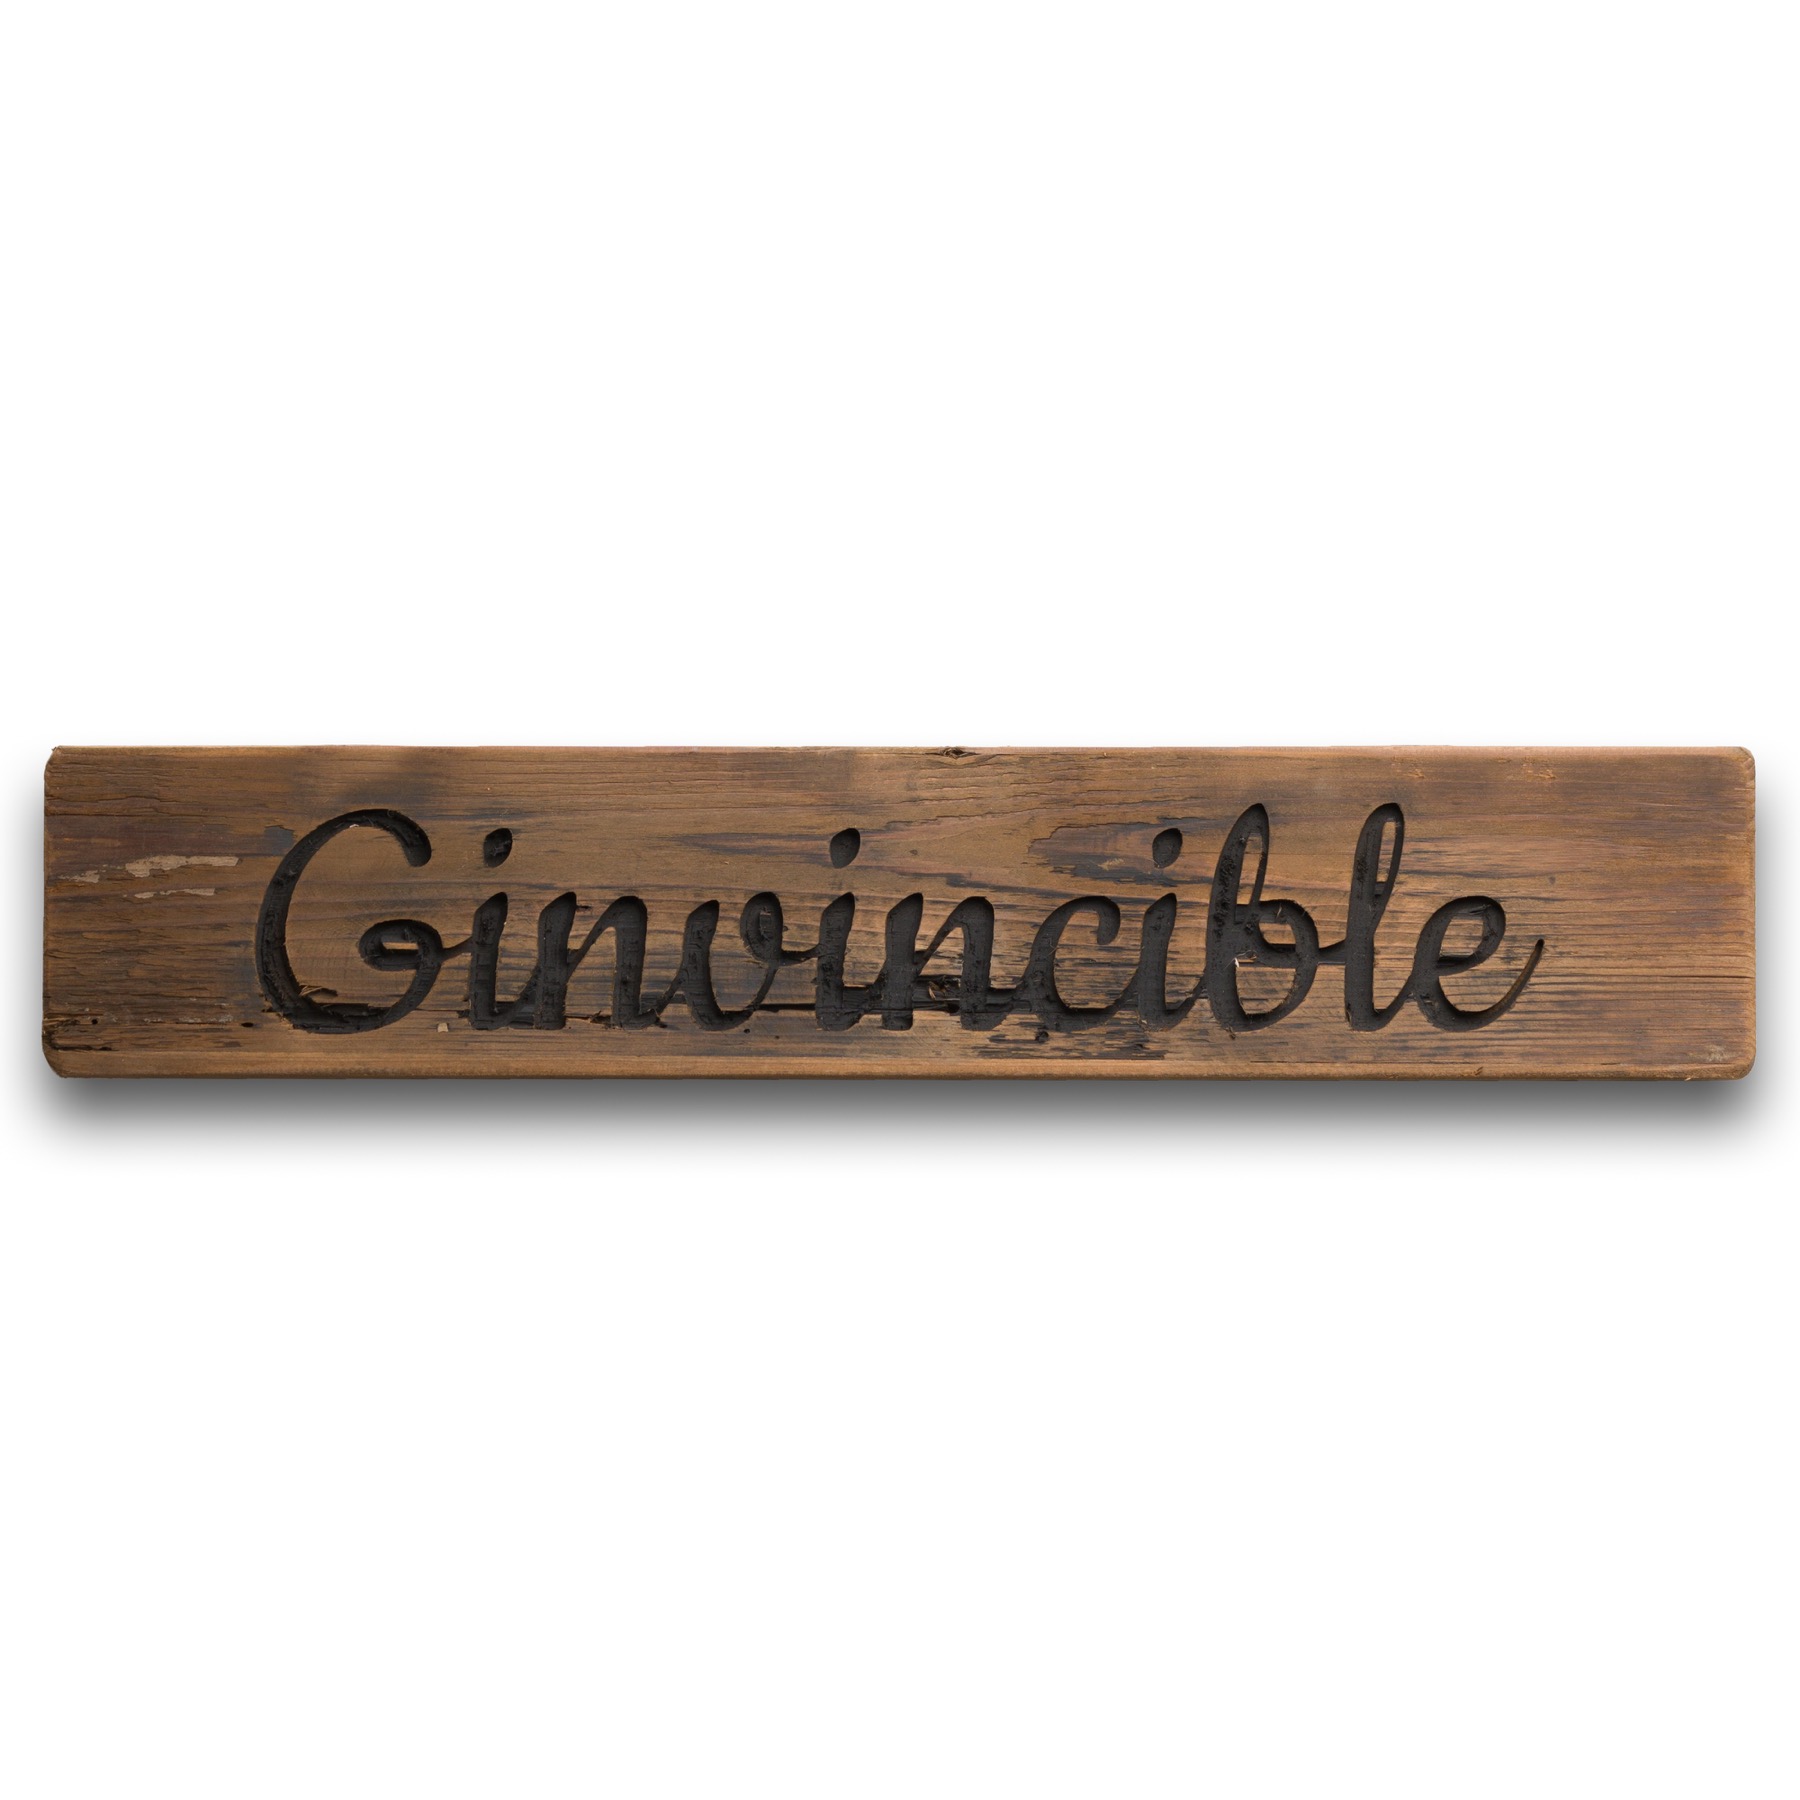 Ginvincible Rustic Wooden Message Plaque - Image 1